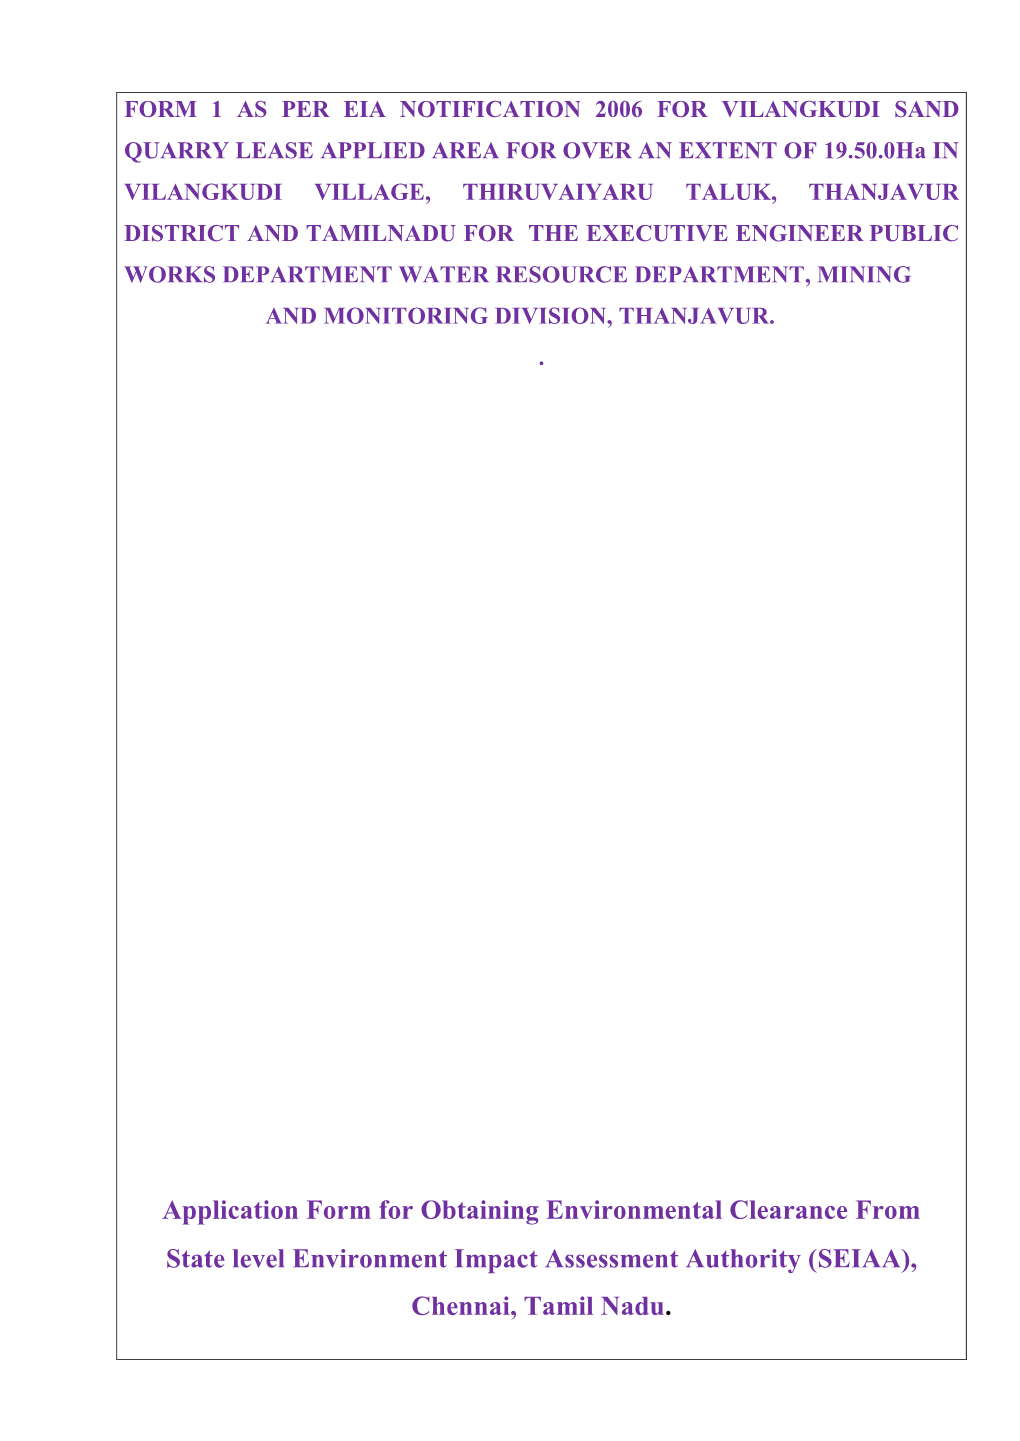 Application Form for Obtaining Environmental Clearance from State Level Environment Impact Assessment Authority (SEIAA), Chennai, Tamil Nadu